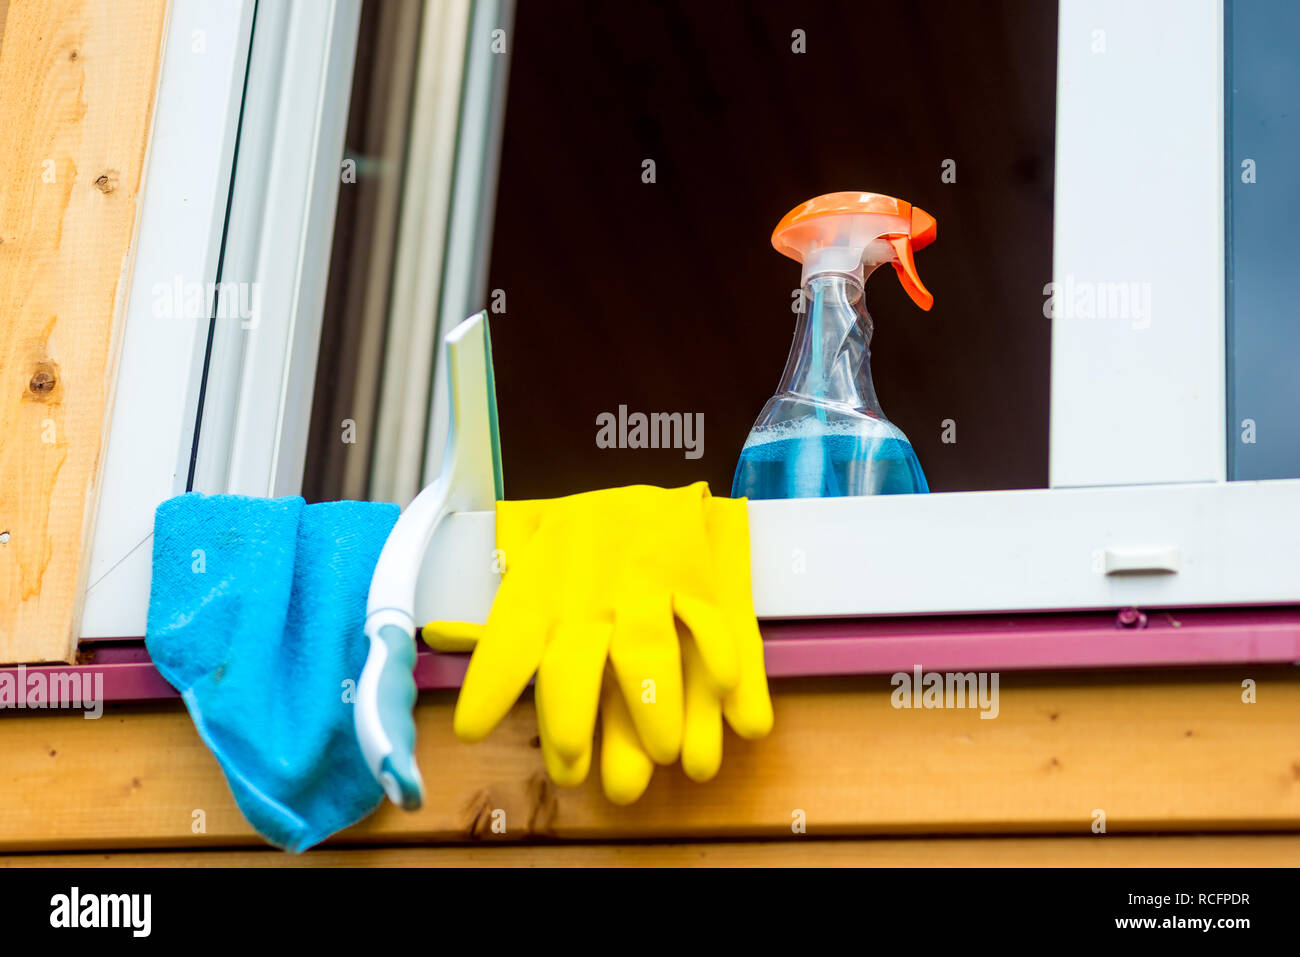 https://c8.alamy.com/comp/RCFPDR/window-cleaning-tools-on-window-sill-close-up-RCFPDR.jpg